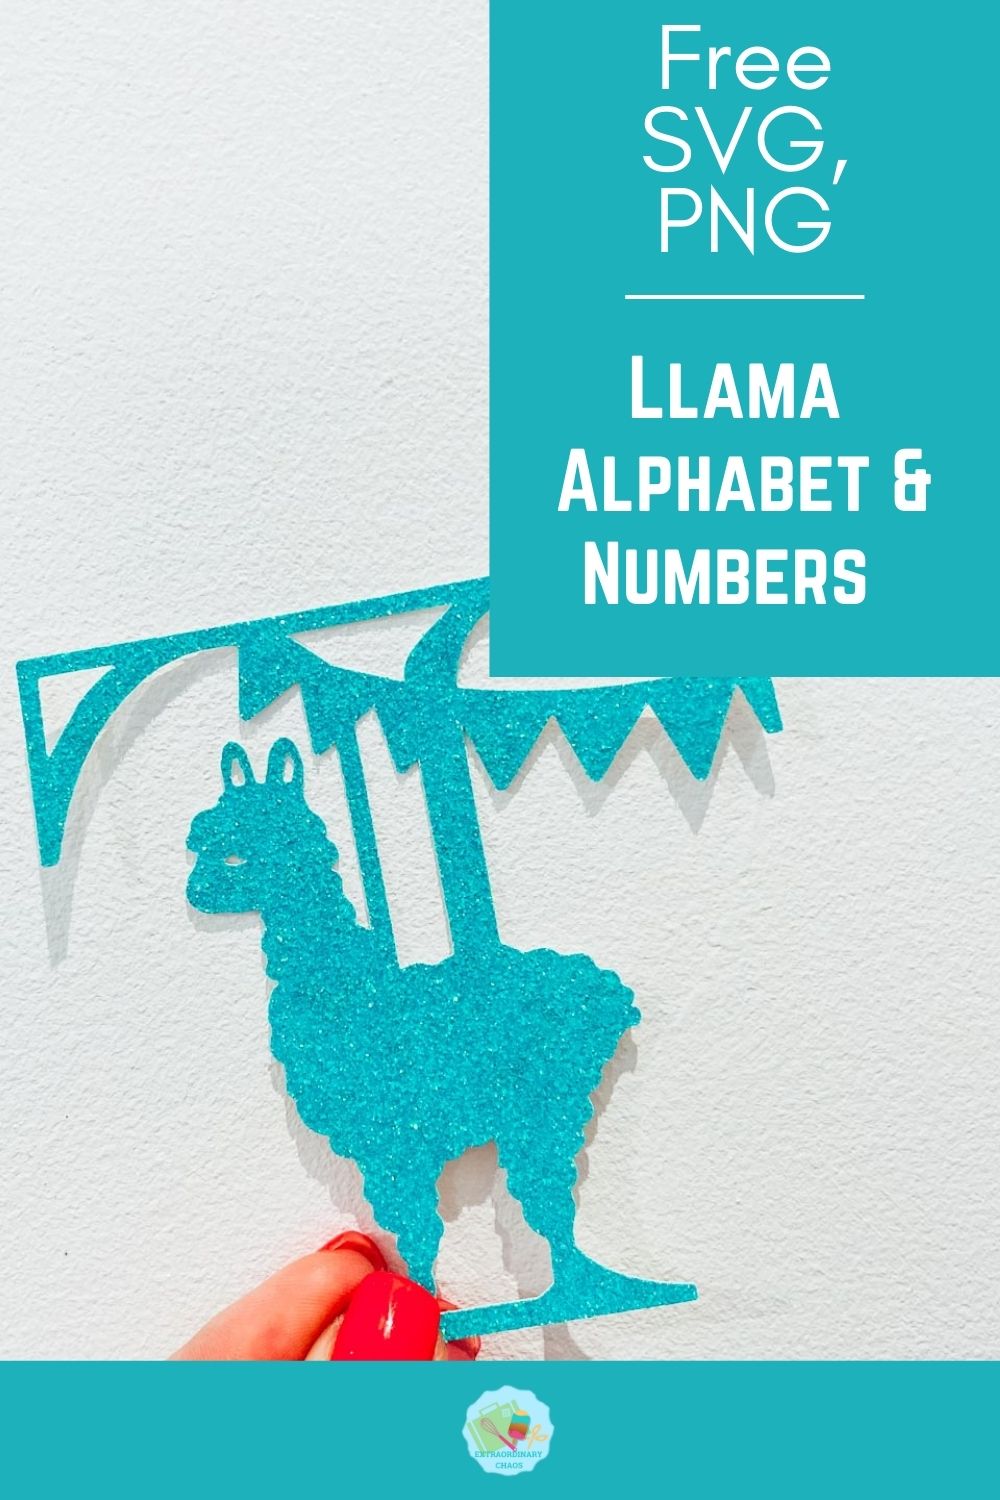 Free Llama Alphabets and numbers for Cricut, Silhouette and Glowforge